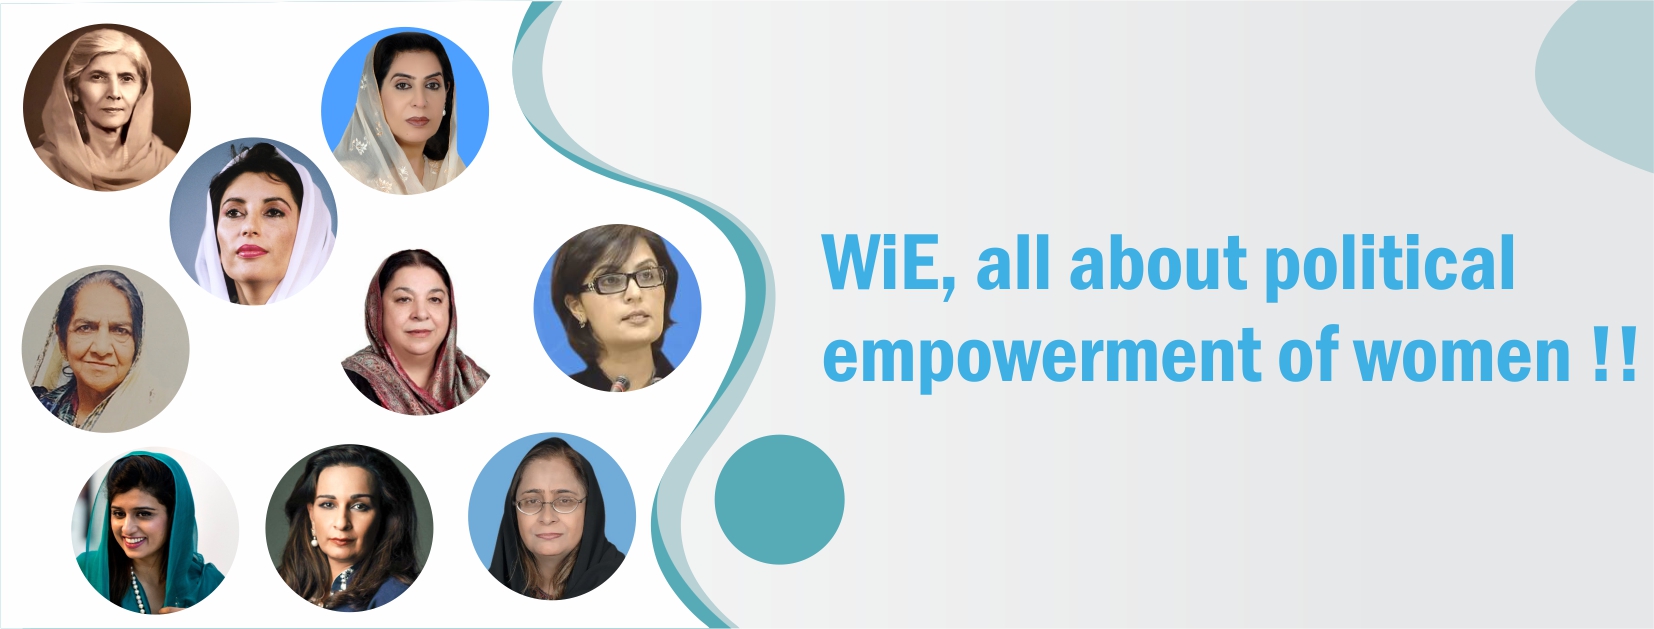 WiE is all about Political Empowerment of Women